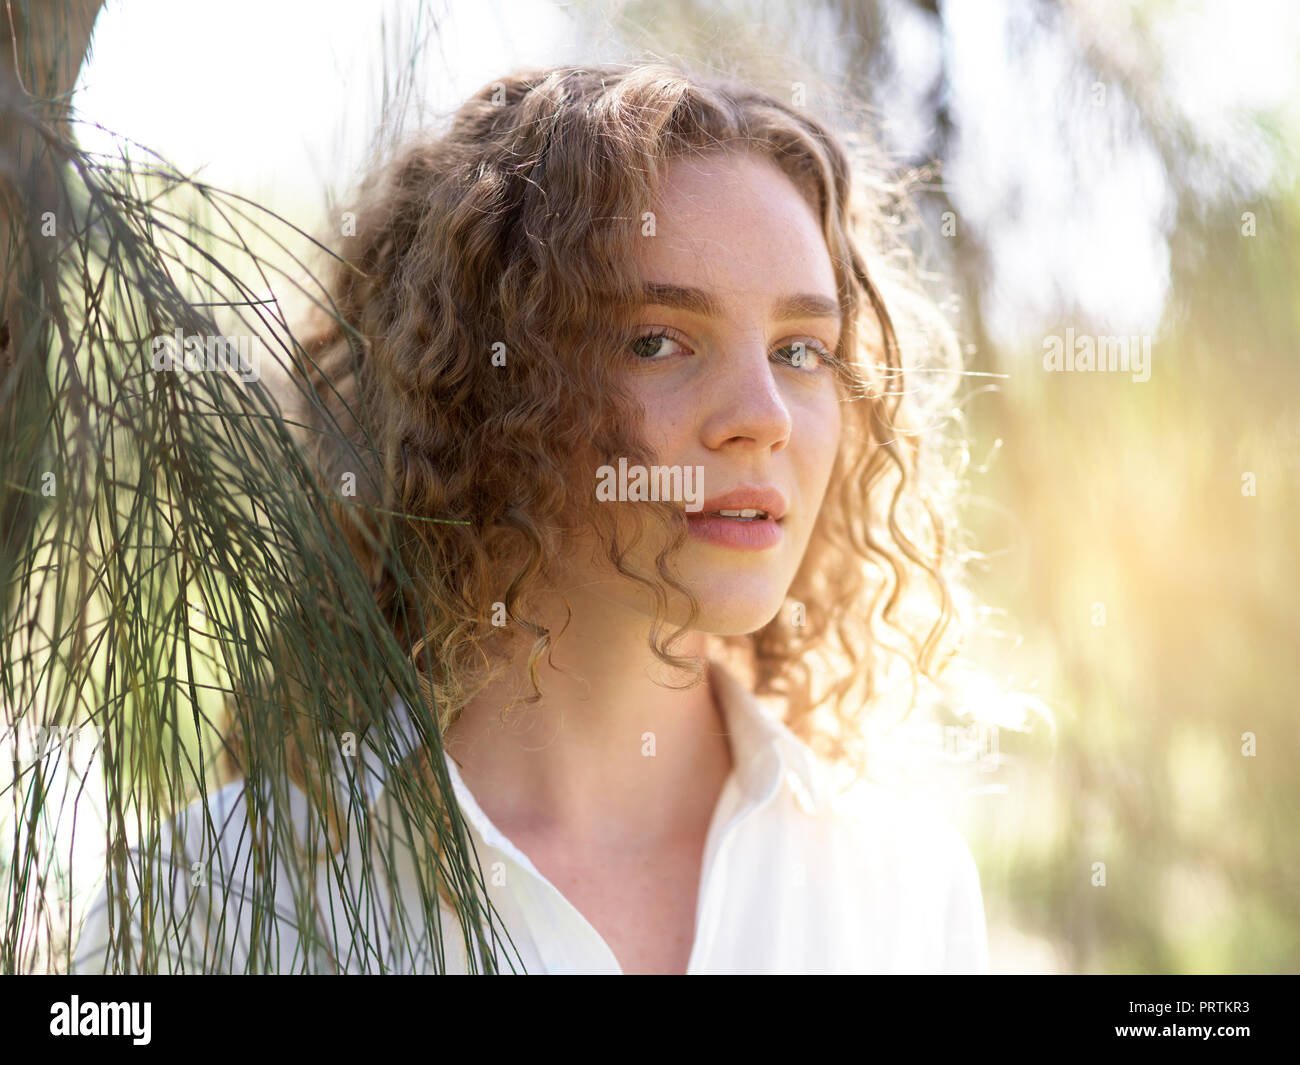 Portrait of young woman in nature Stock Photo